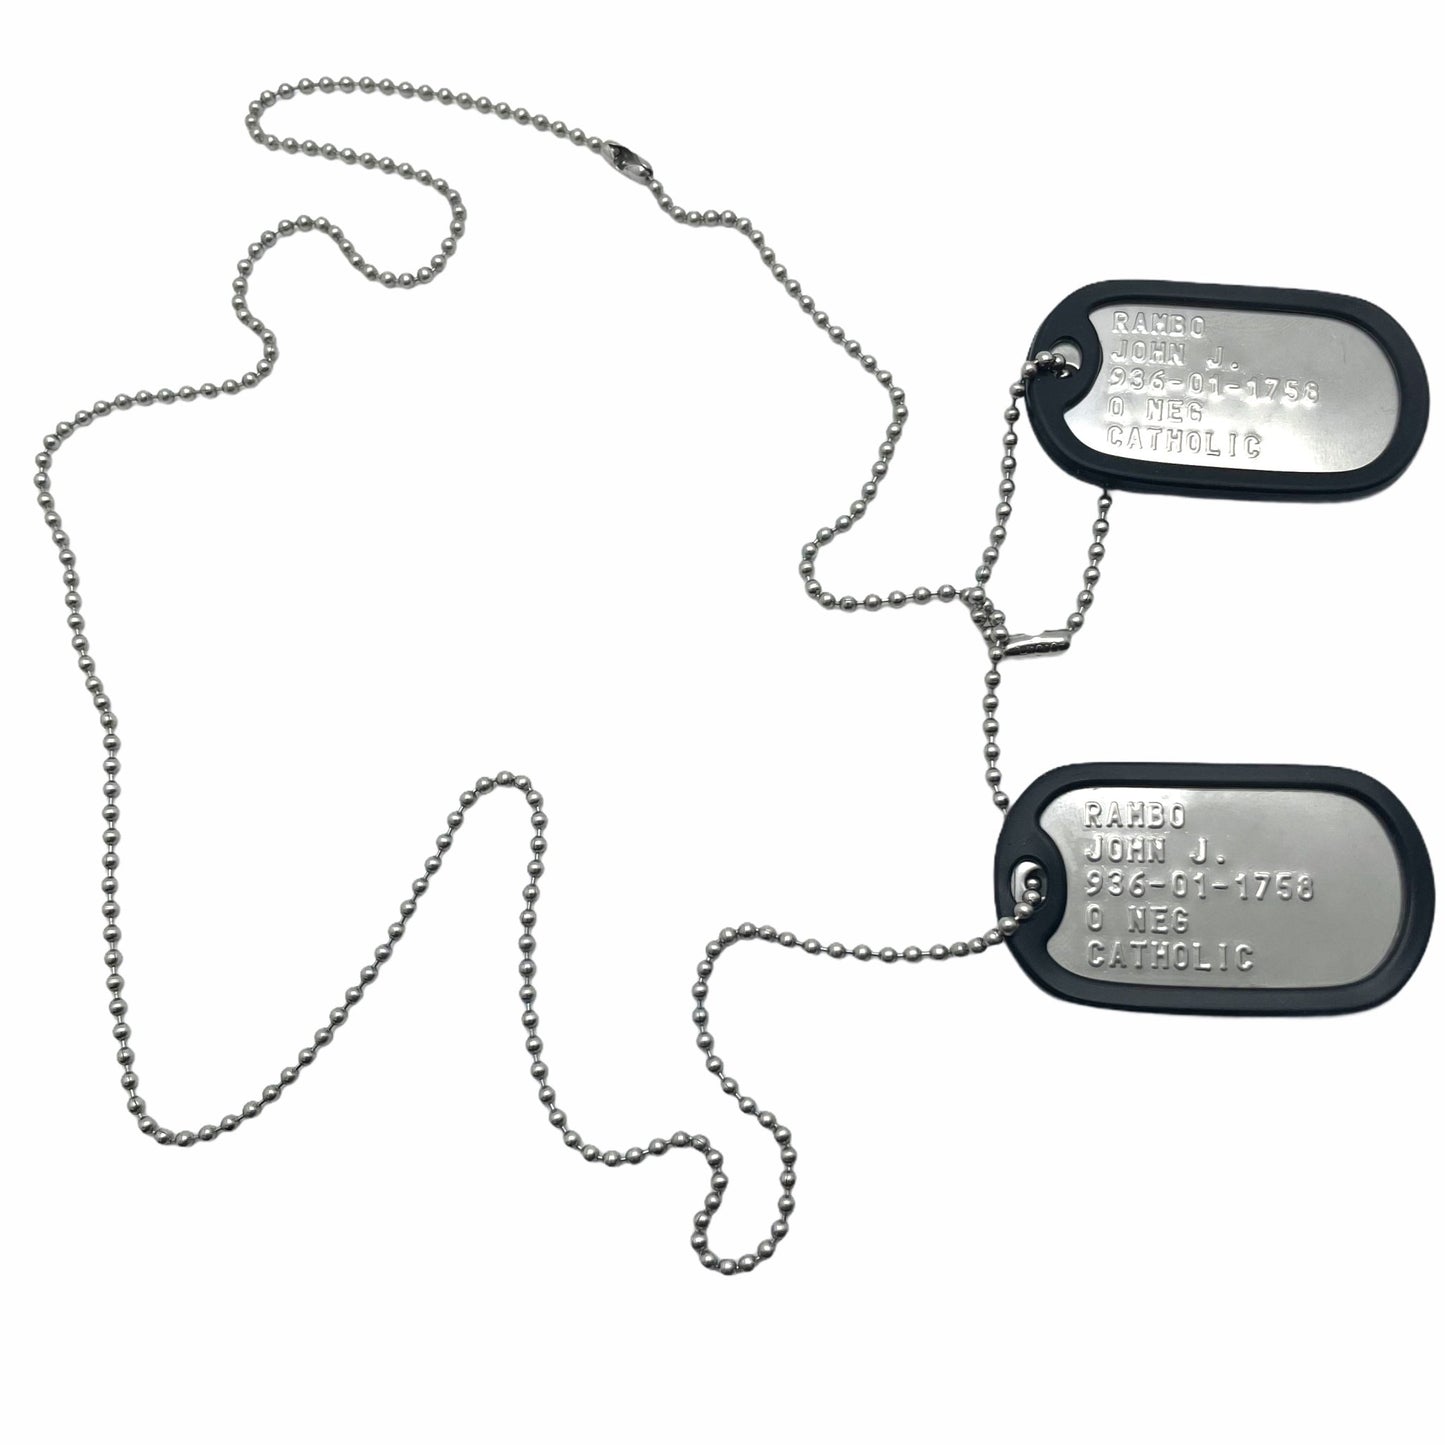 JOHN JAMES RAMBO Military Dog Tags Set Costume Prop Replica - Stainless Steel - Chain Included - TheDogTagCo